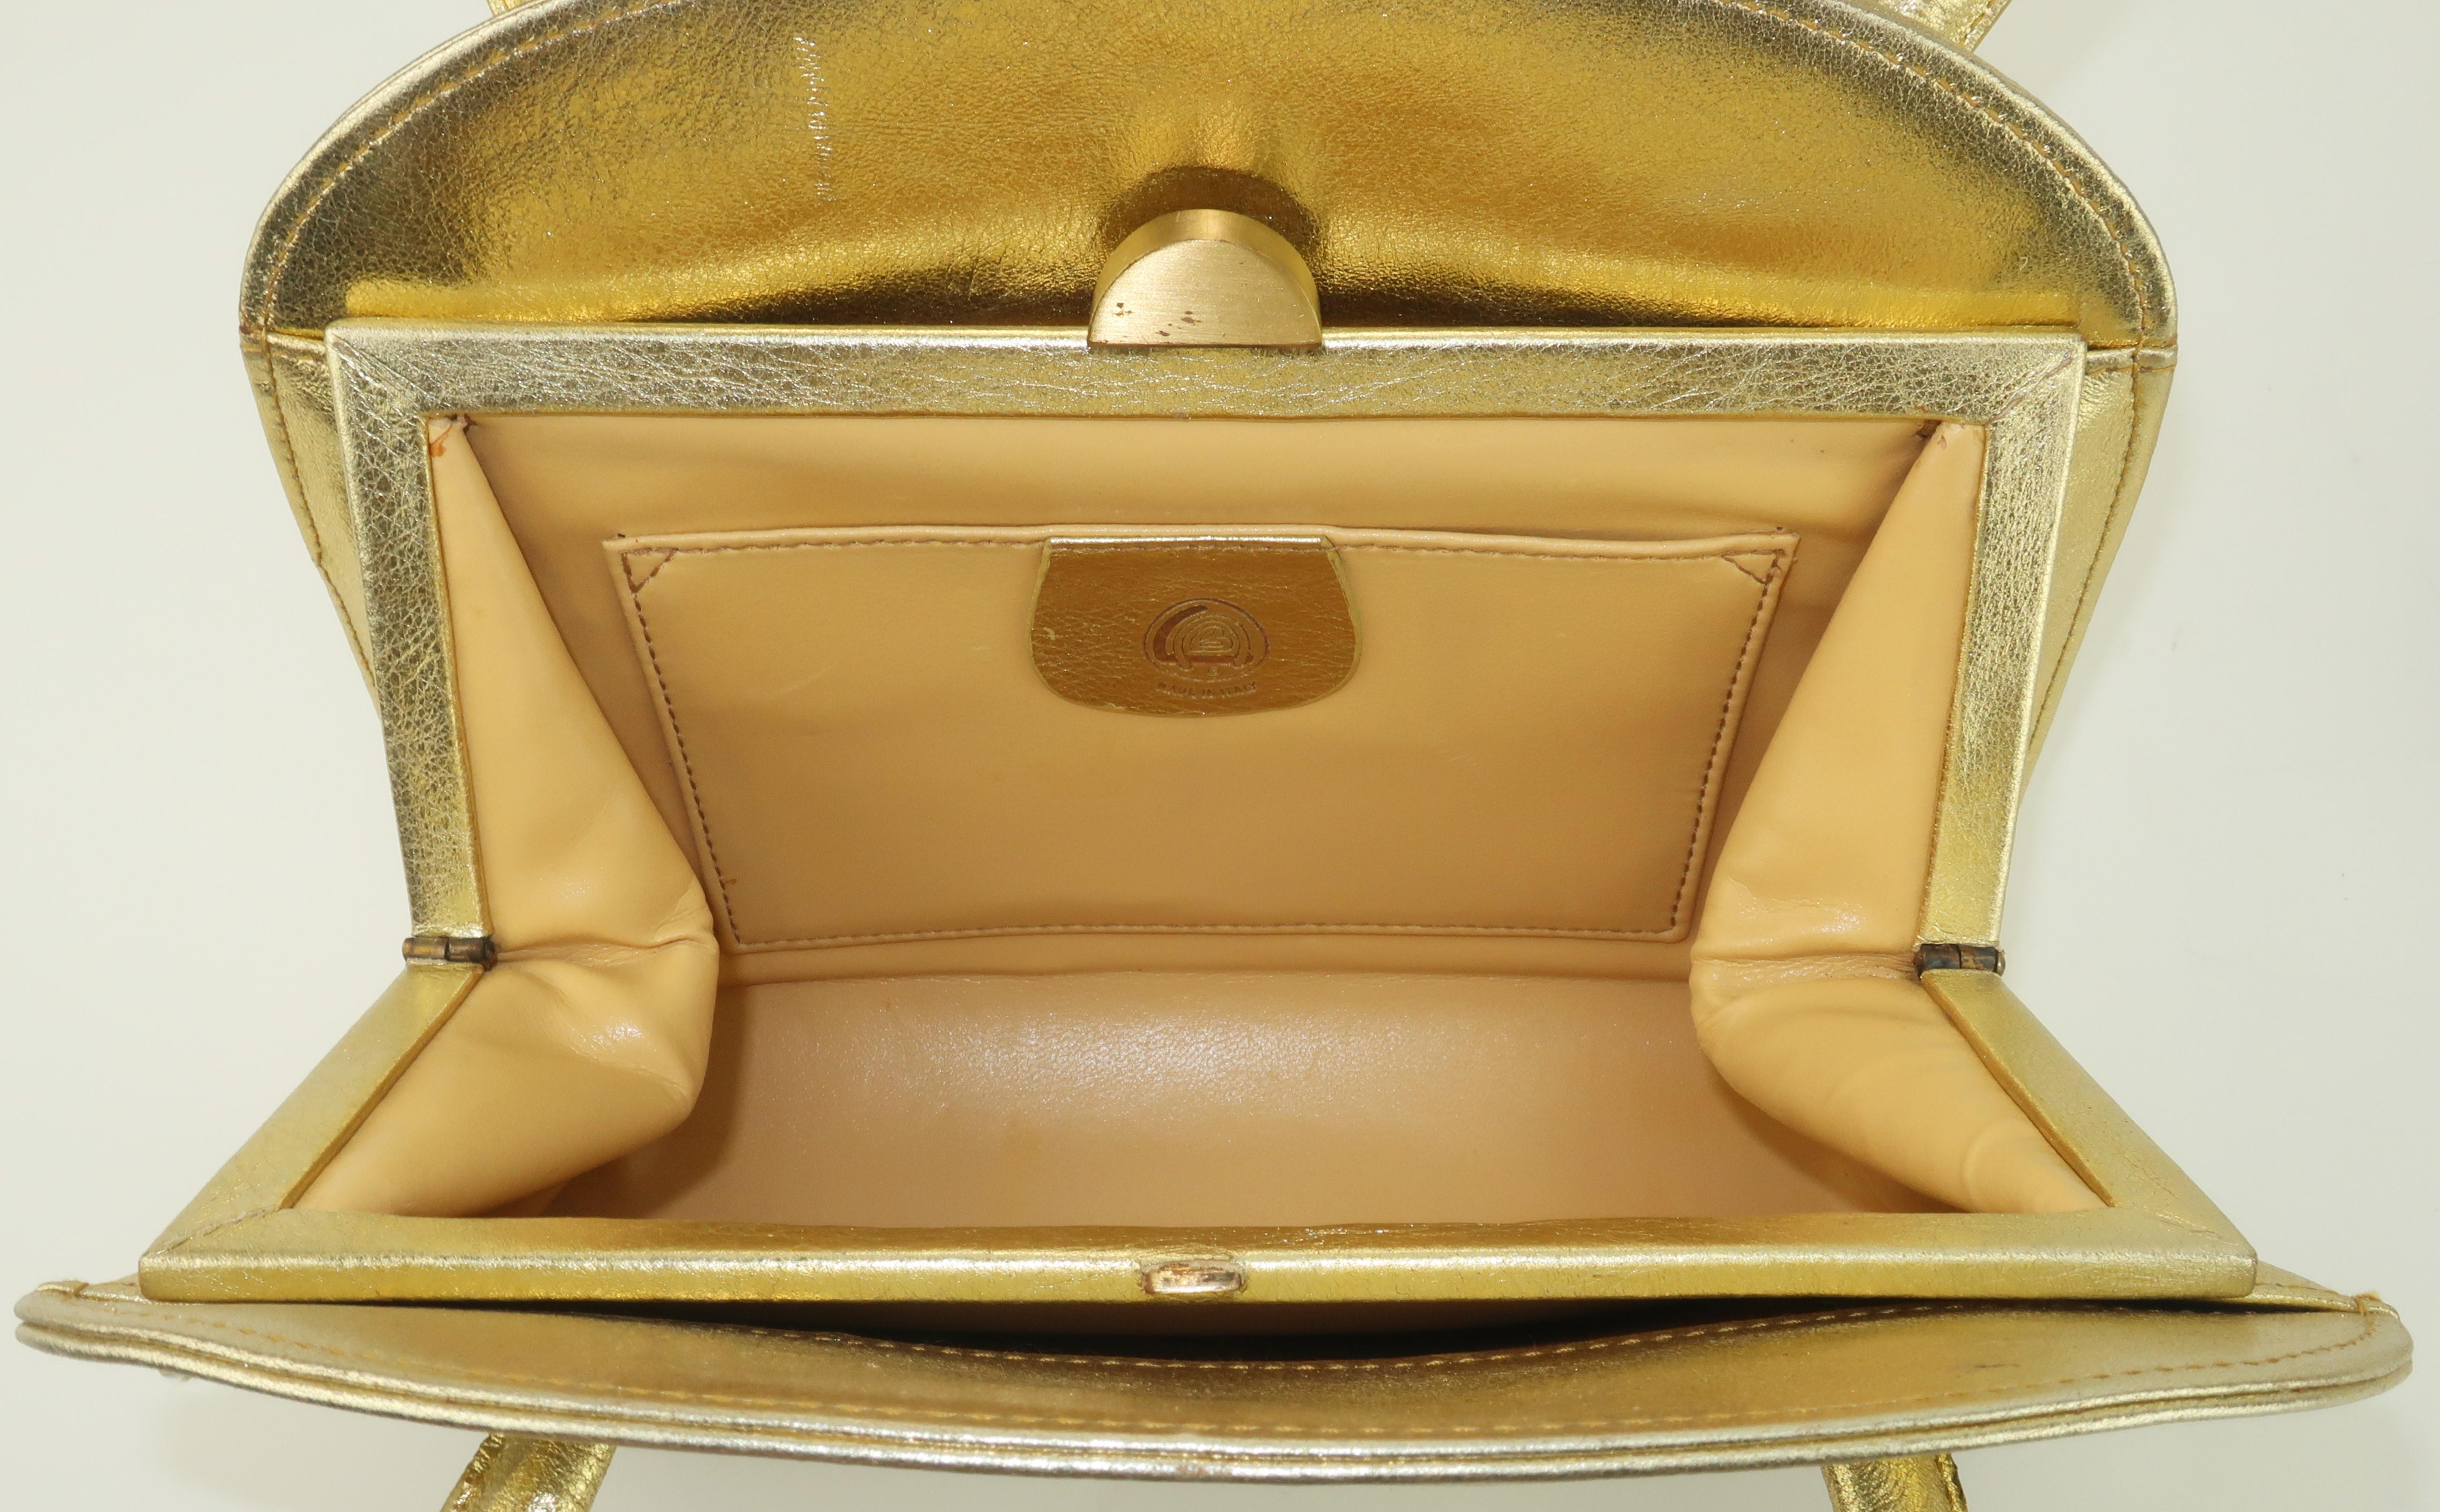 Laura Biagiotti Attributed Gold Leather Handbag, 1970's For Sale 7